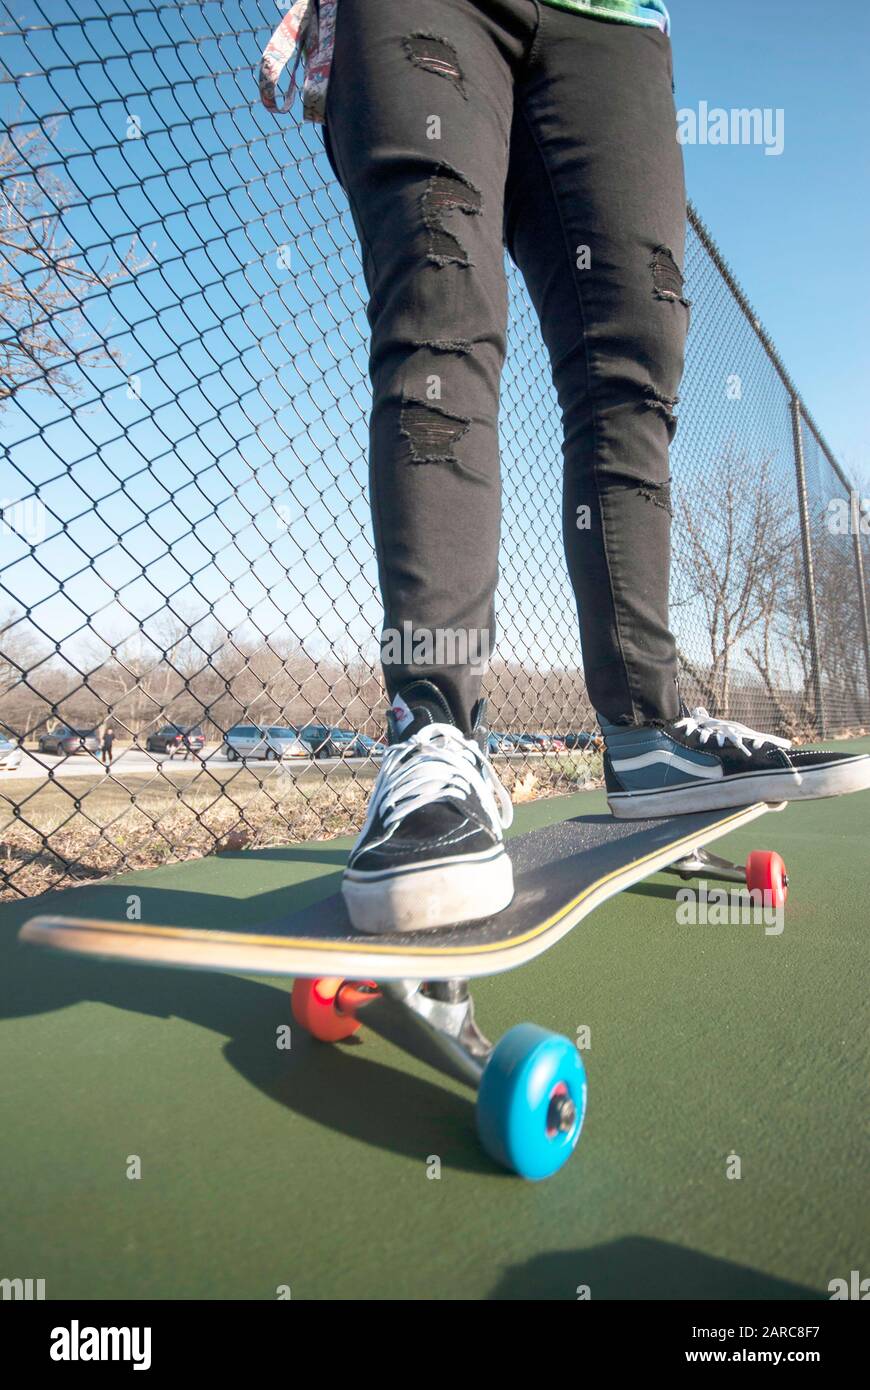 Person in vans sneakers standing on a skateboard with colored wheels Stock  Photo - Alamy